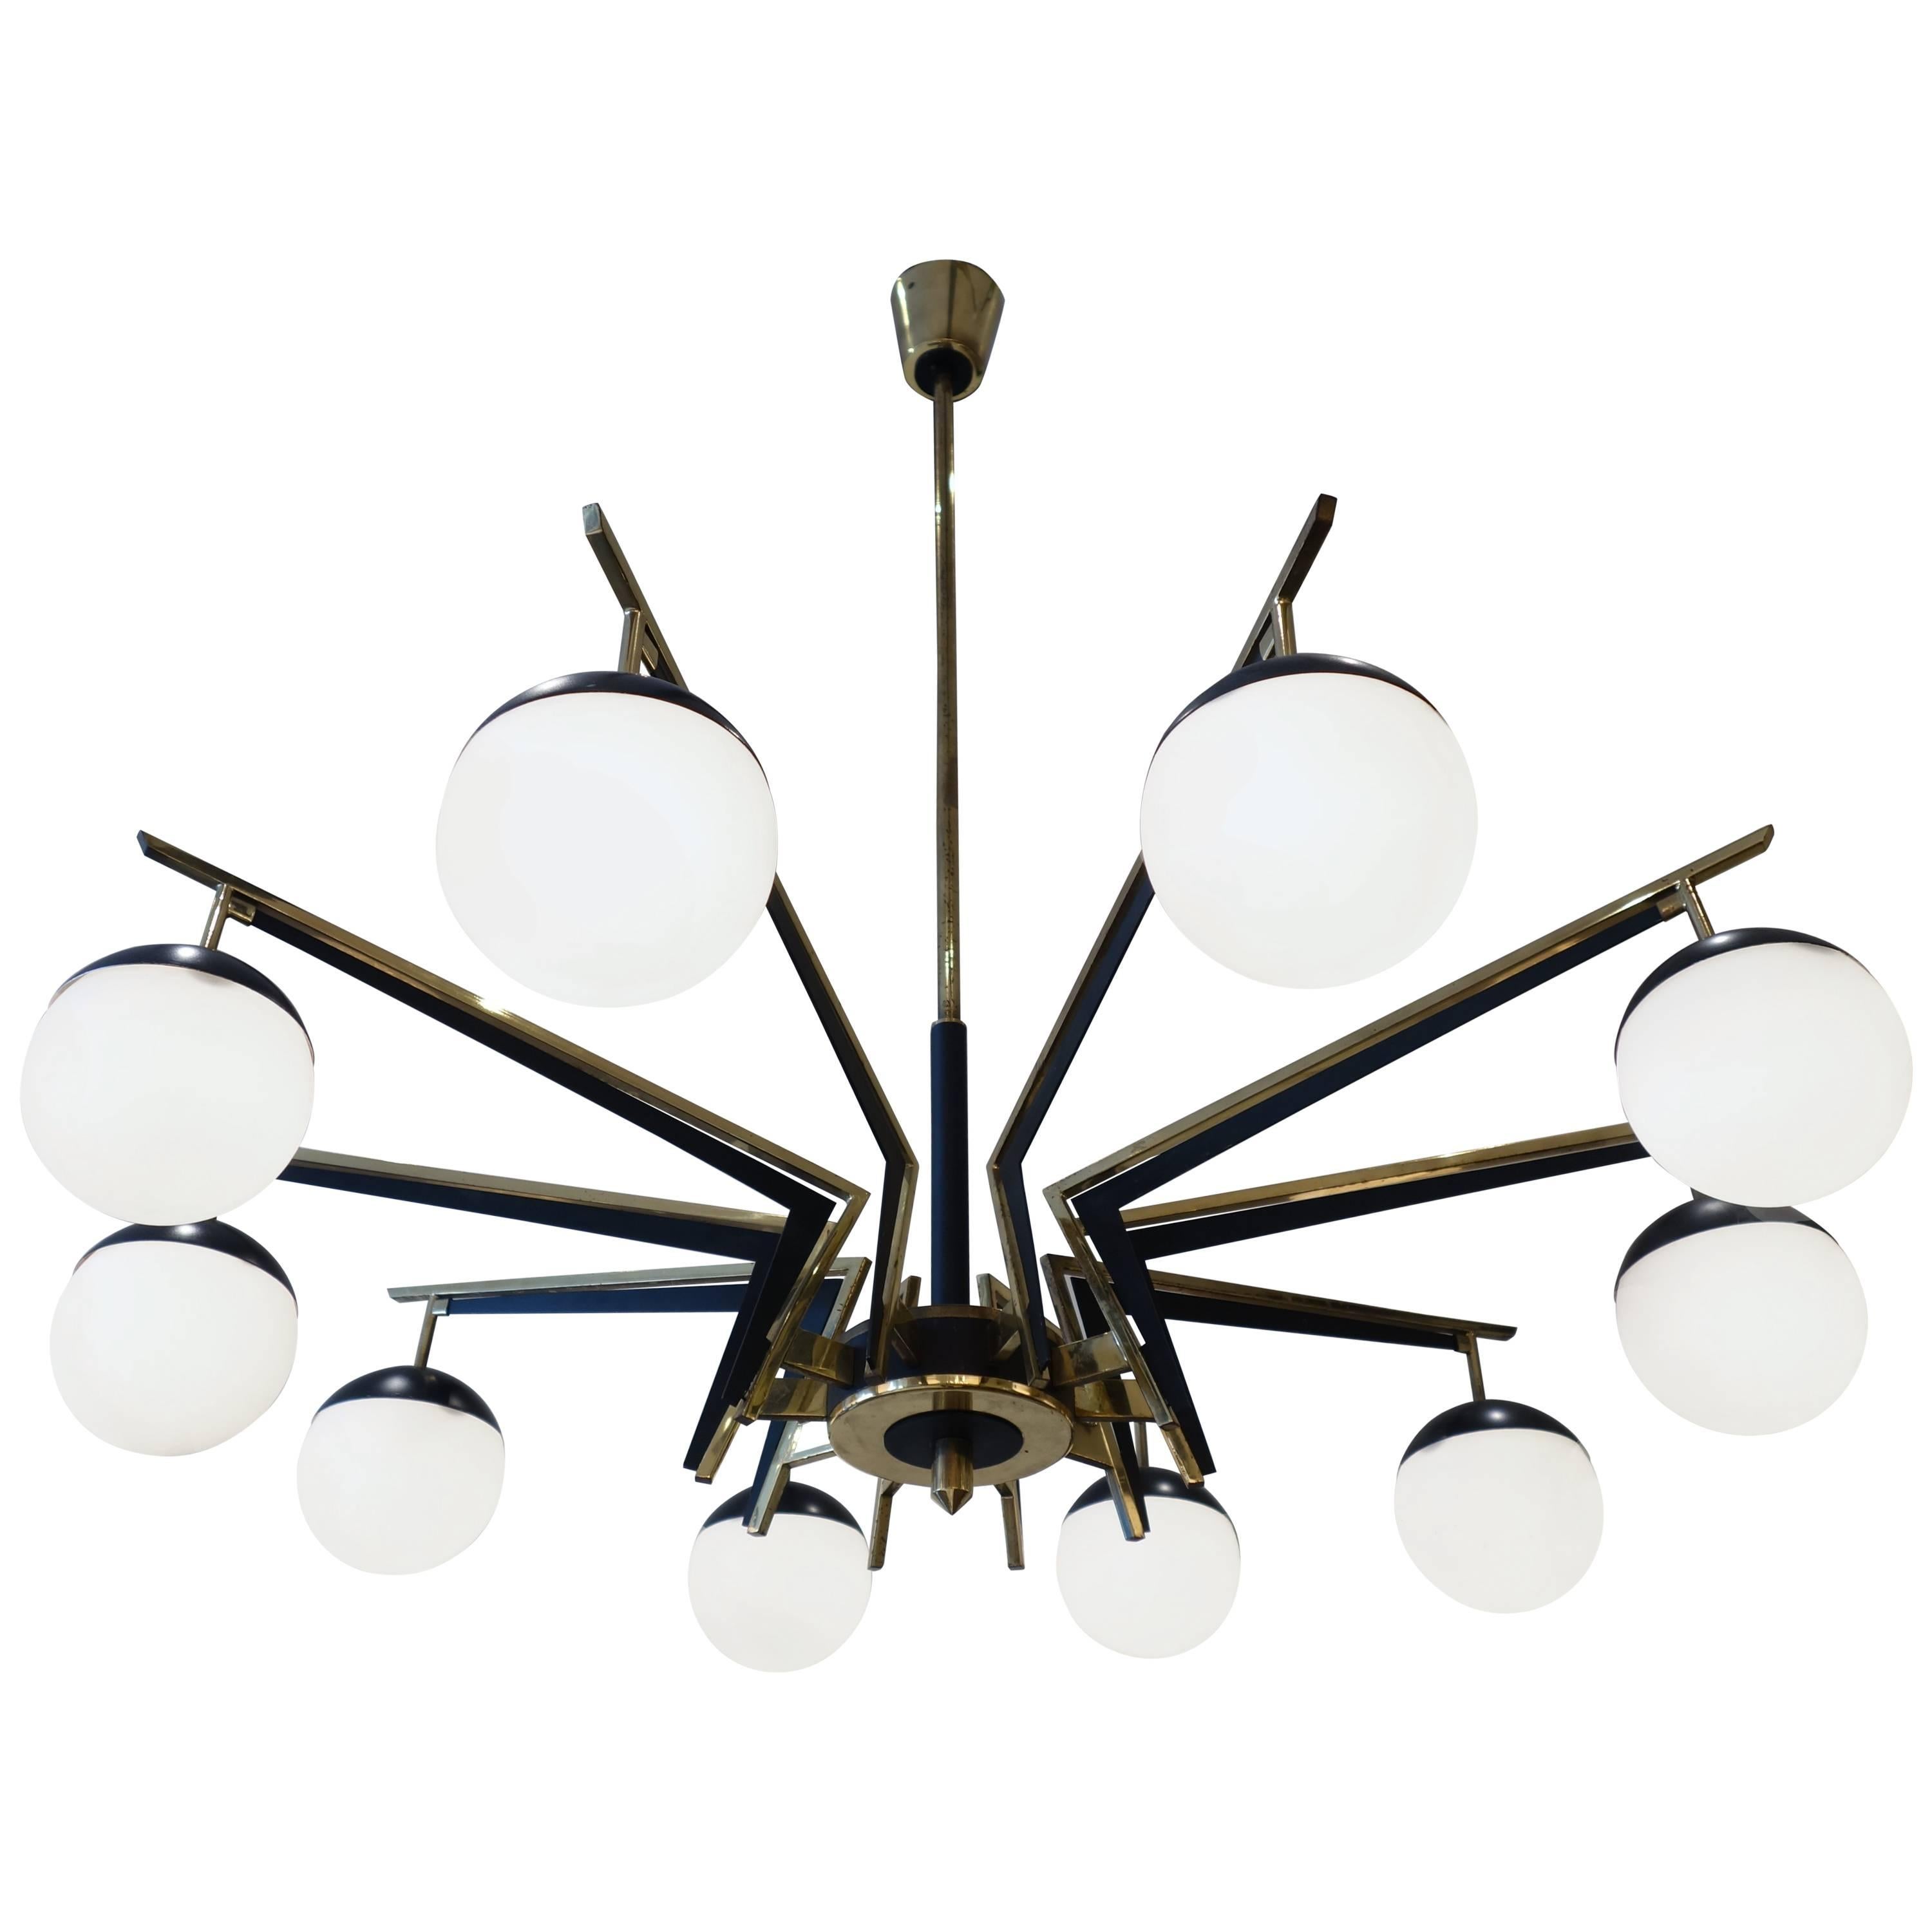 Italian Brass and Black Patinated Metal Chandelier, Opaline Glass, 1950s